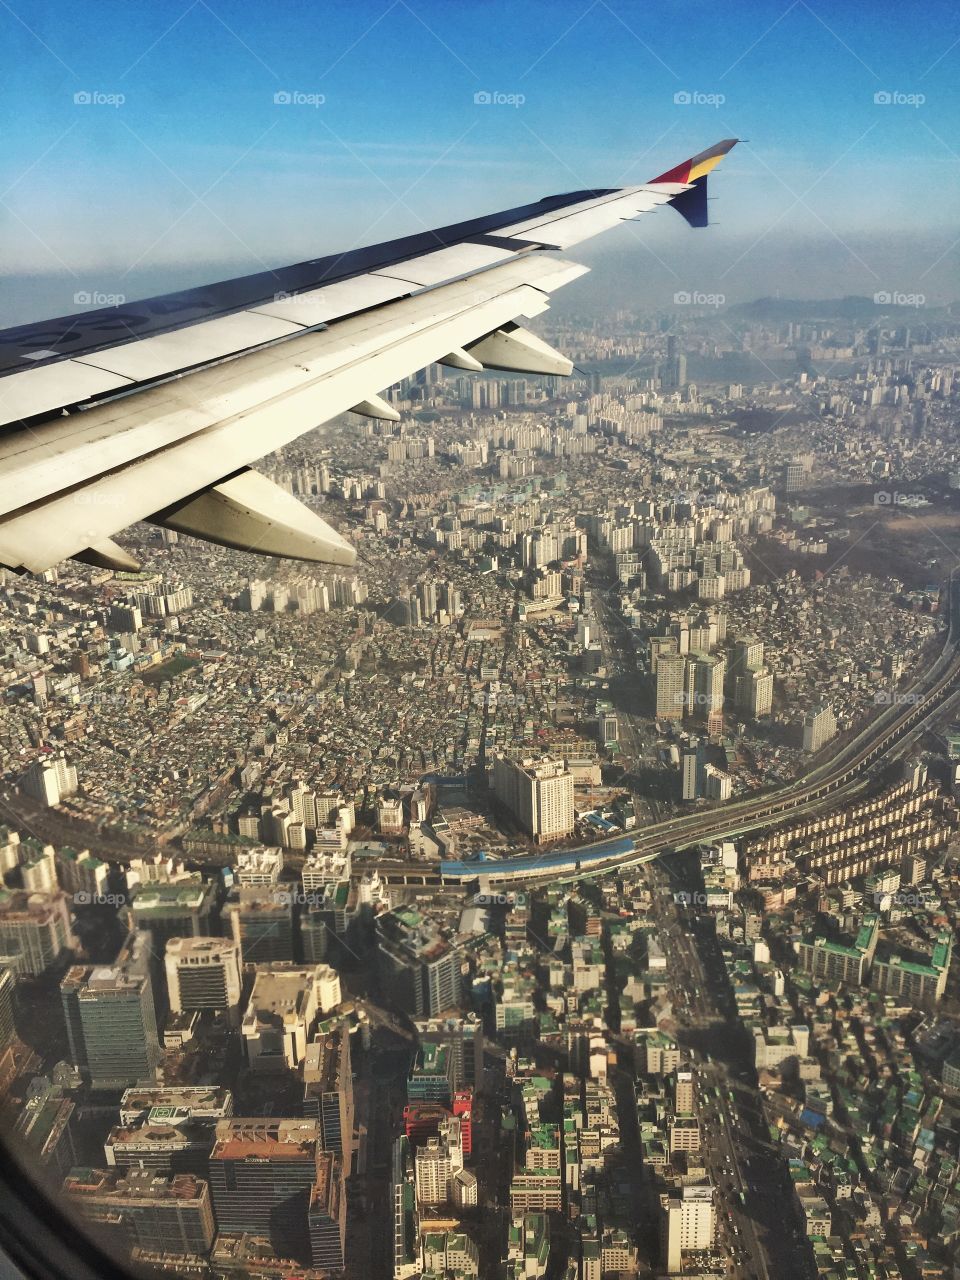 Seoul from the Sky with Asiana Airlines